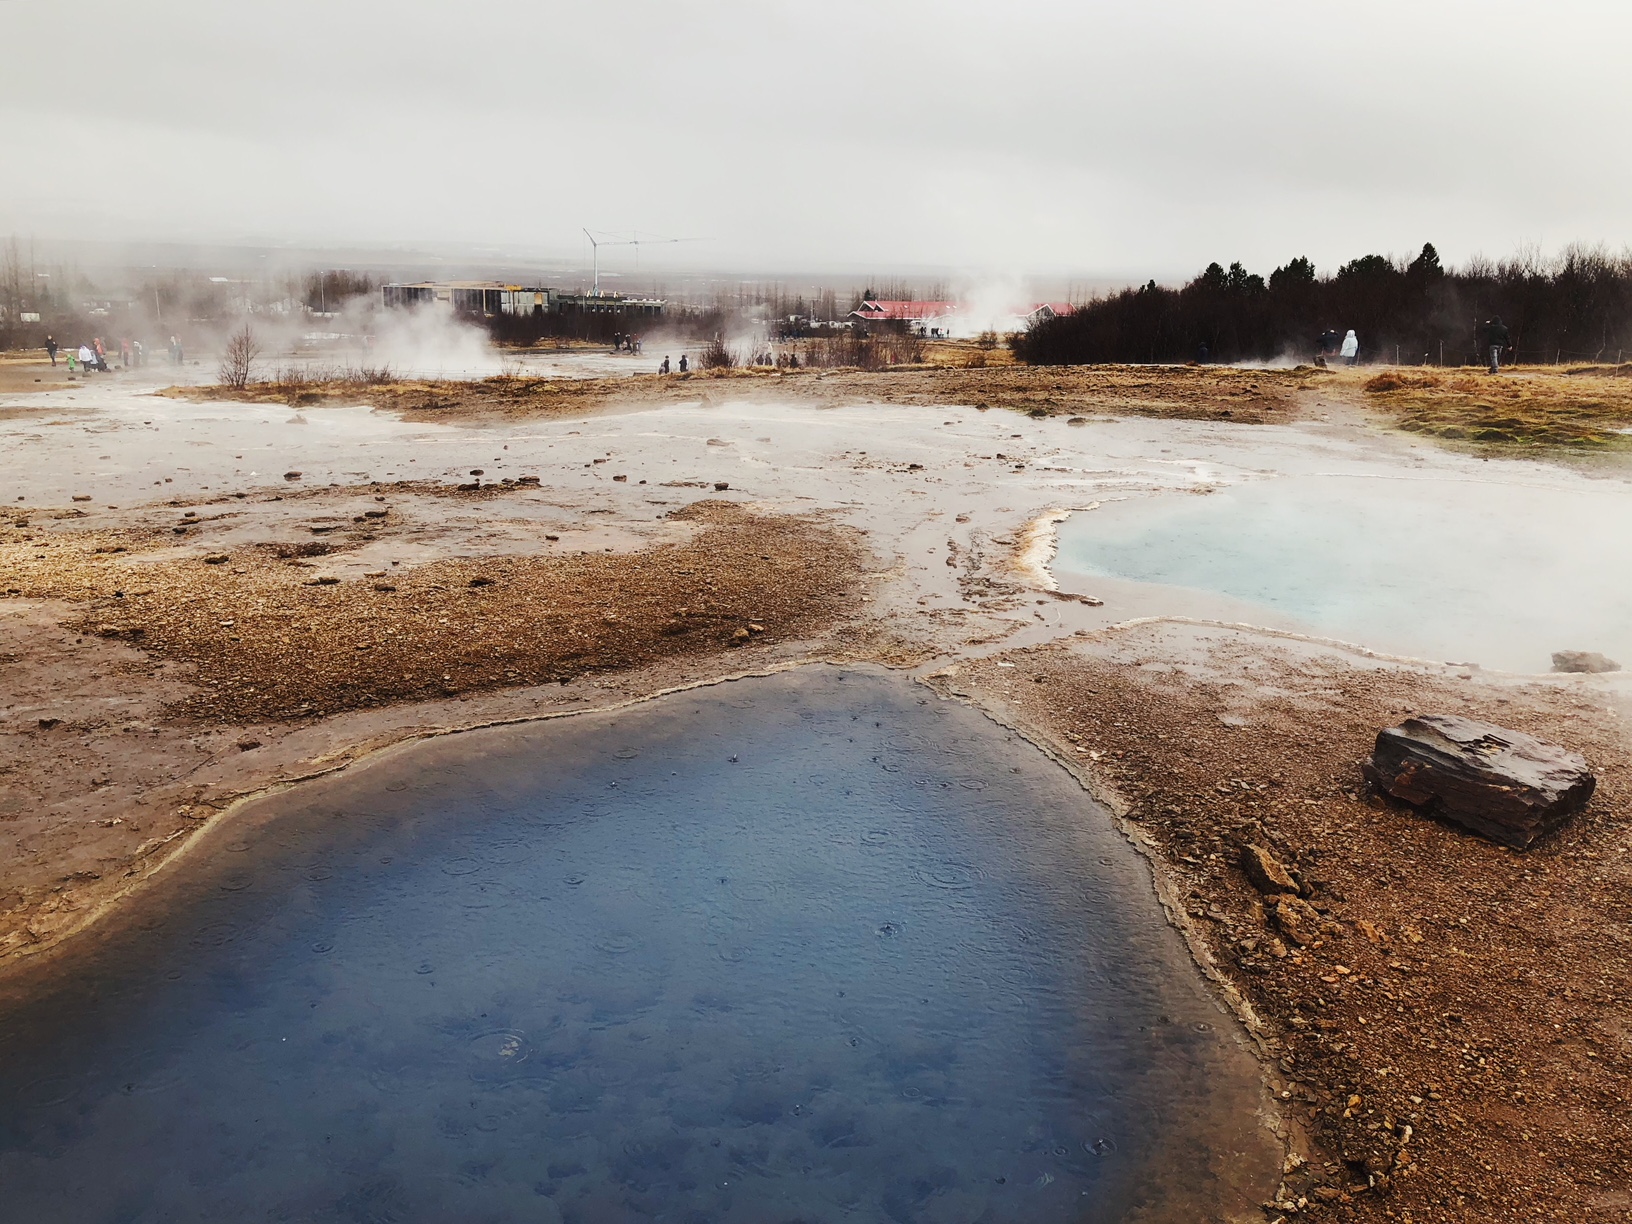  We were happy to have enough time to catch some erupting geysers during our quick stop at Geysir on the Golden Circle. Geysir is one of the first recorded geysers in history (and where the term got it’s namesake). 